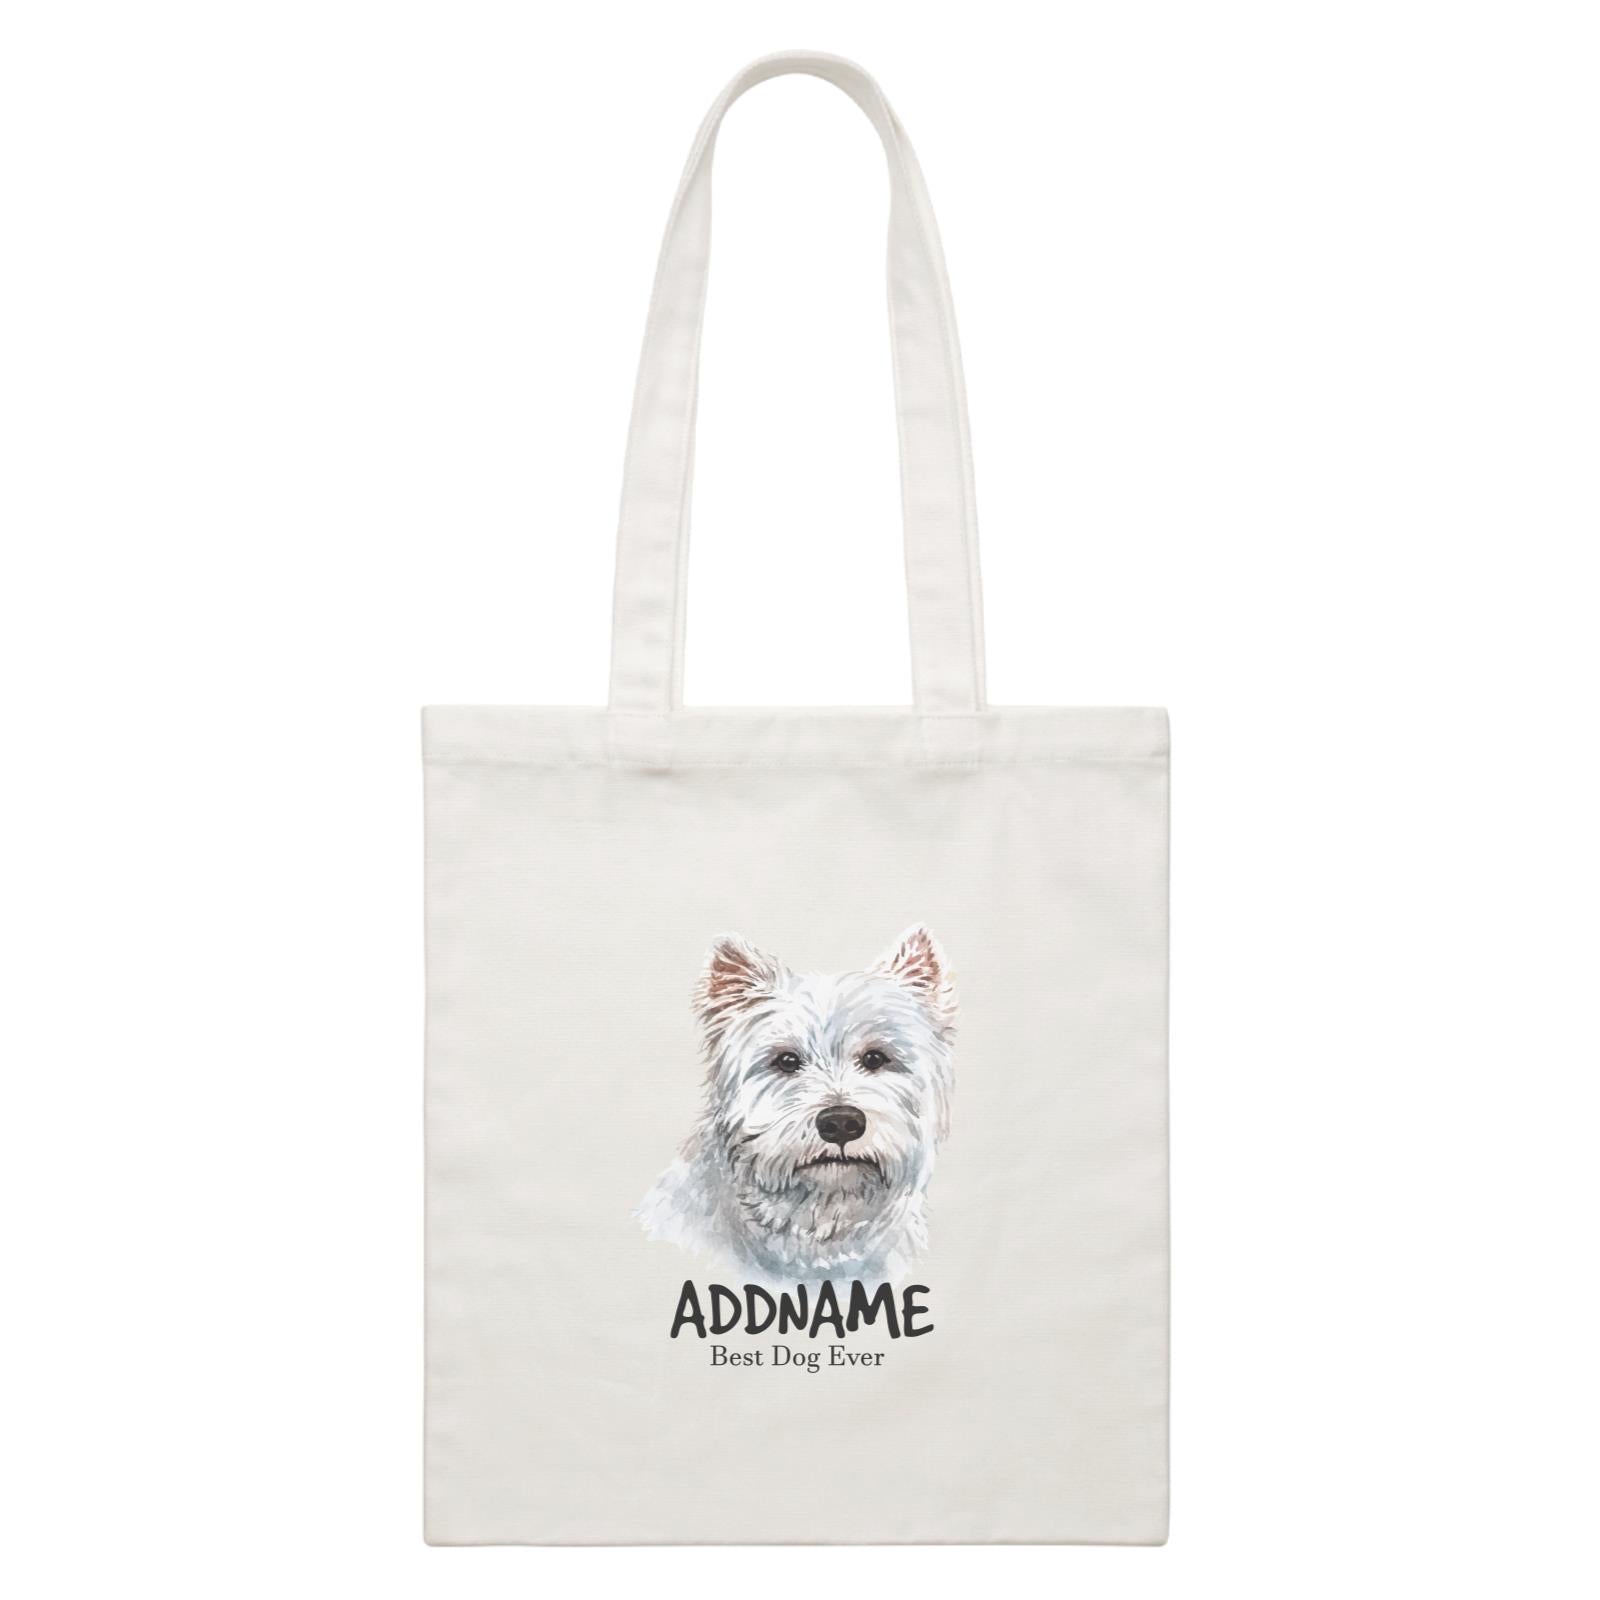 Watercolor Dog West Highland White Terrier Best Dog Ever Addname White Canvas Bag